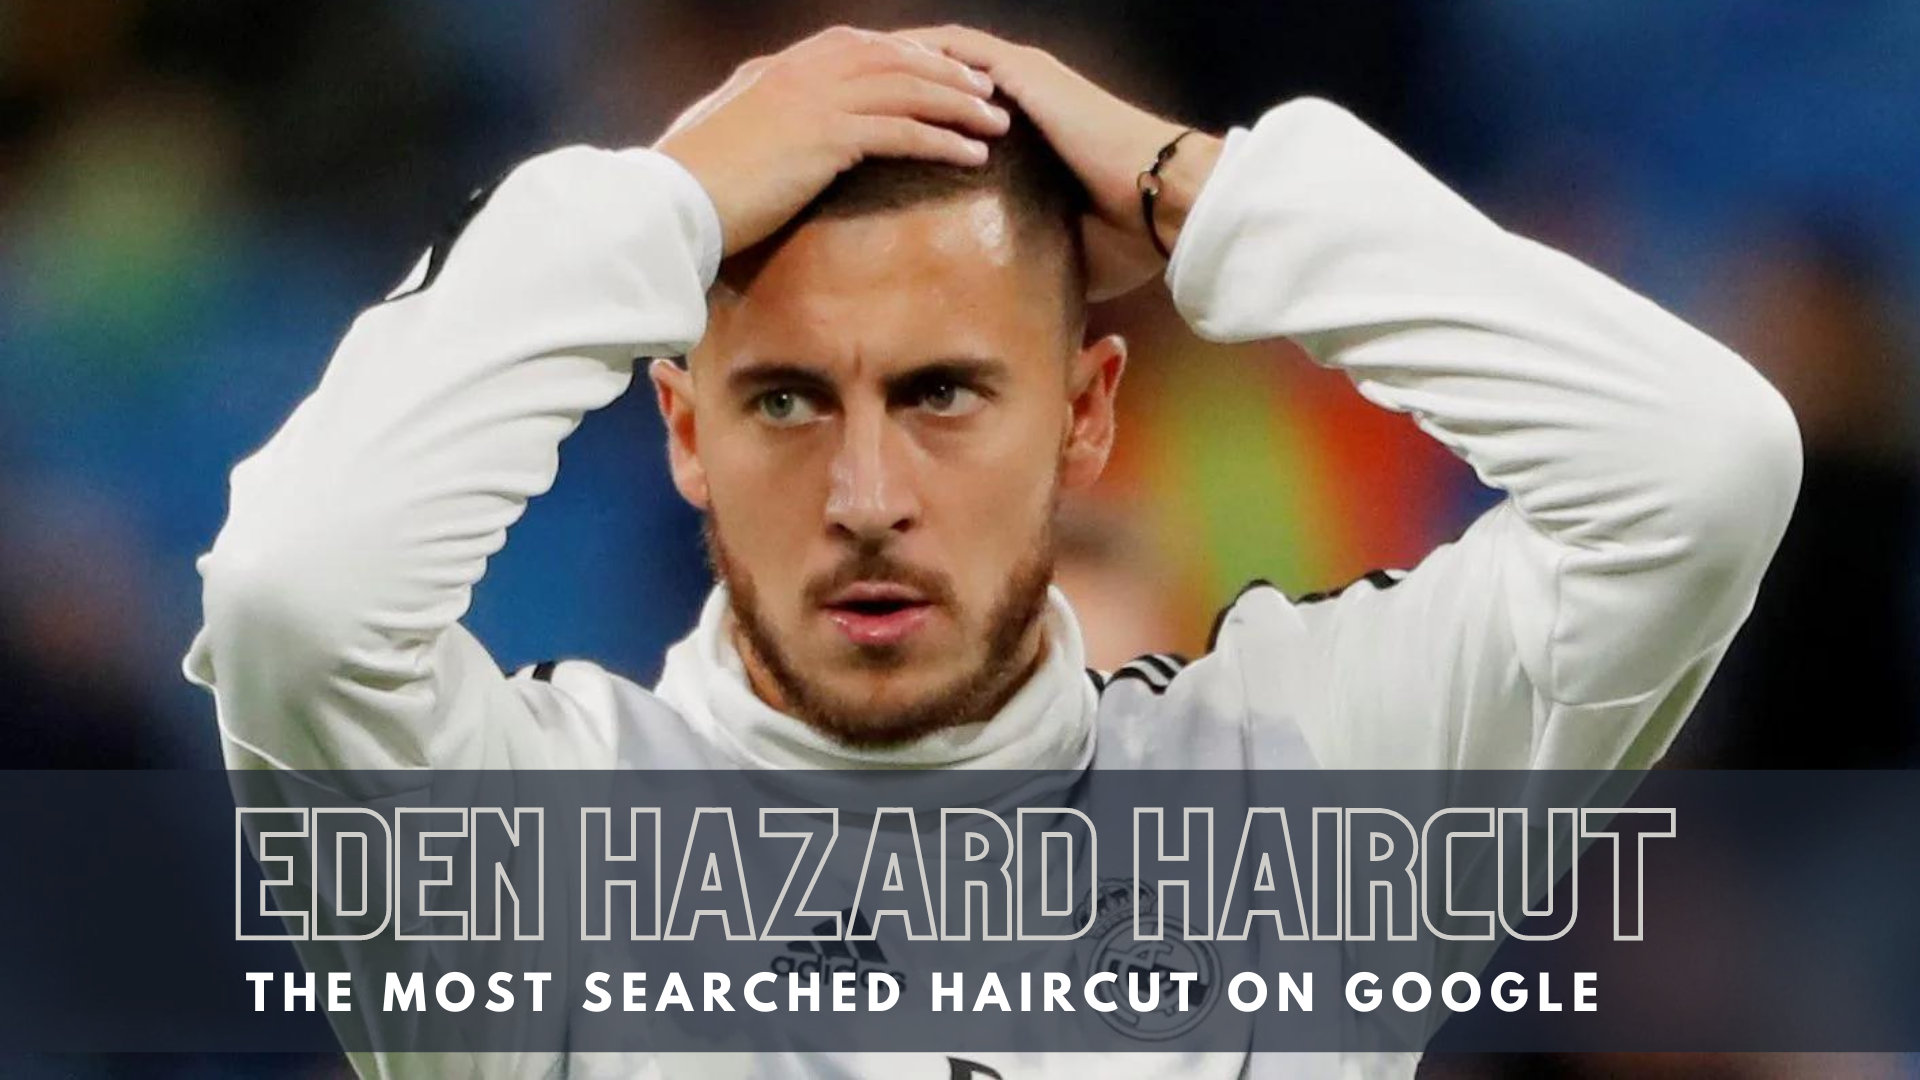 Eden Hazard Haircut - The Most Searched Haircut On Google